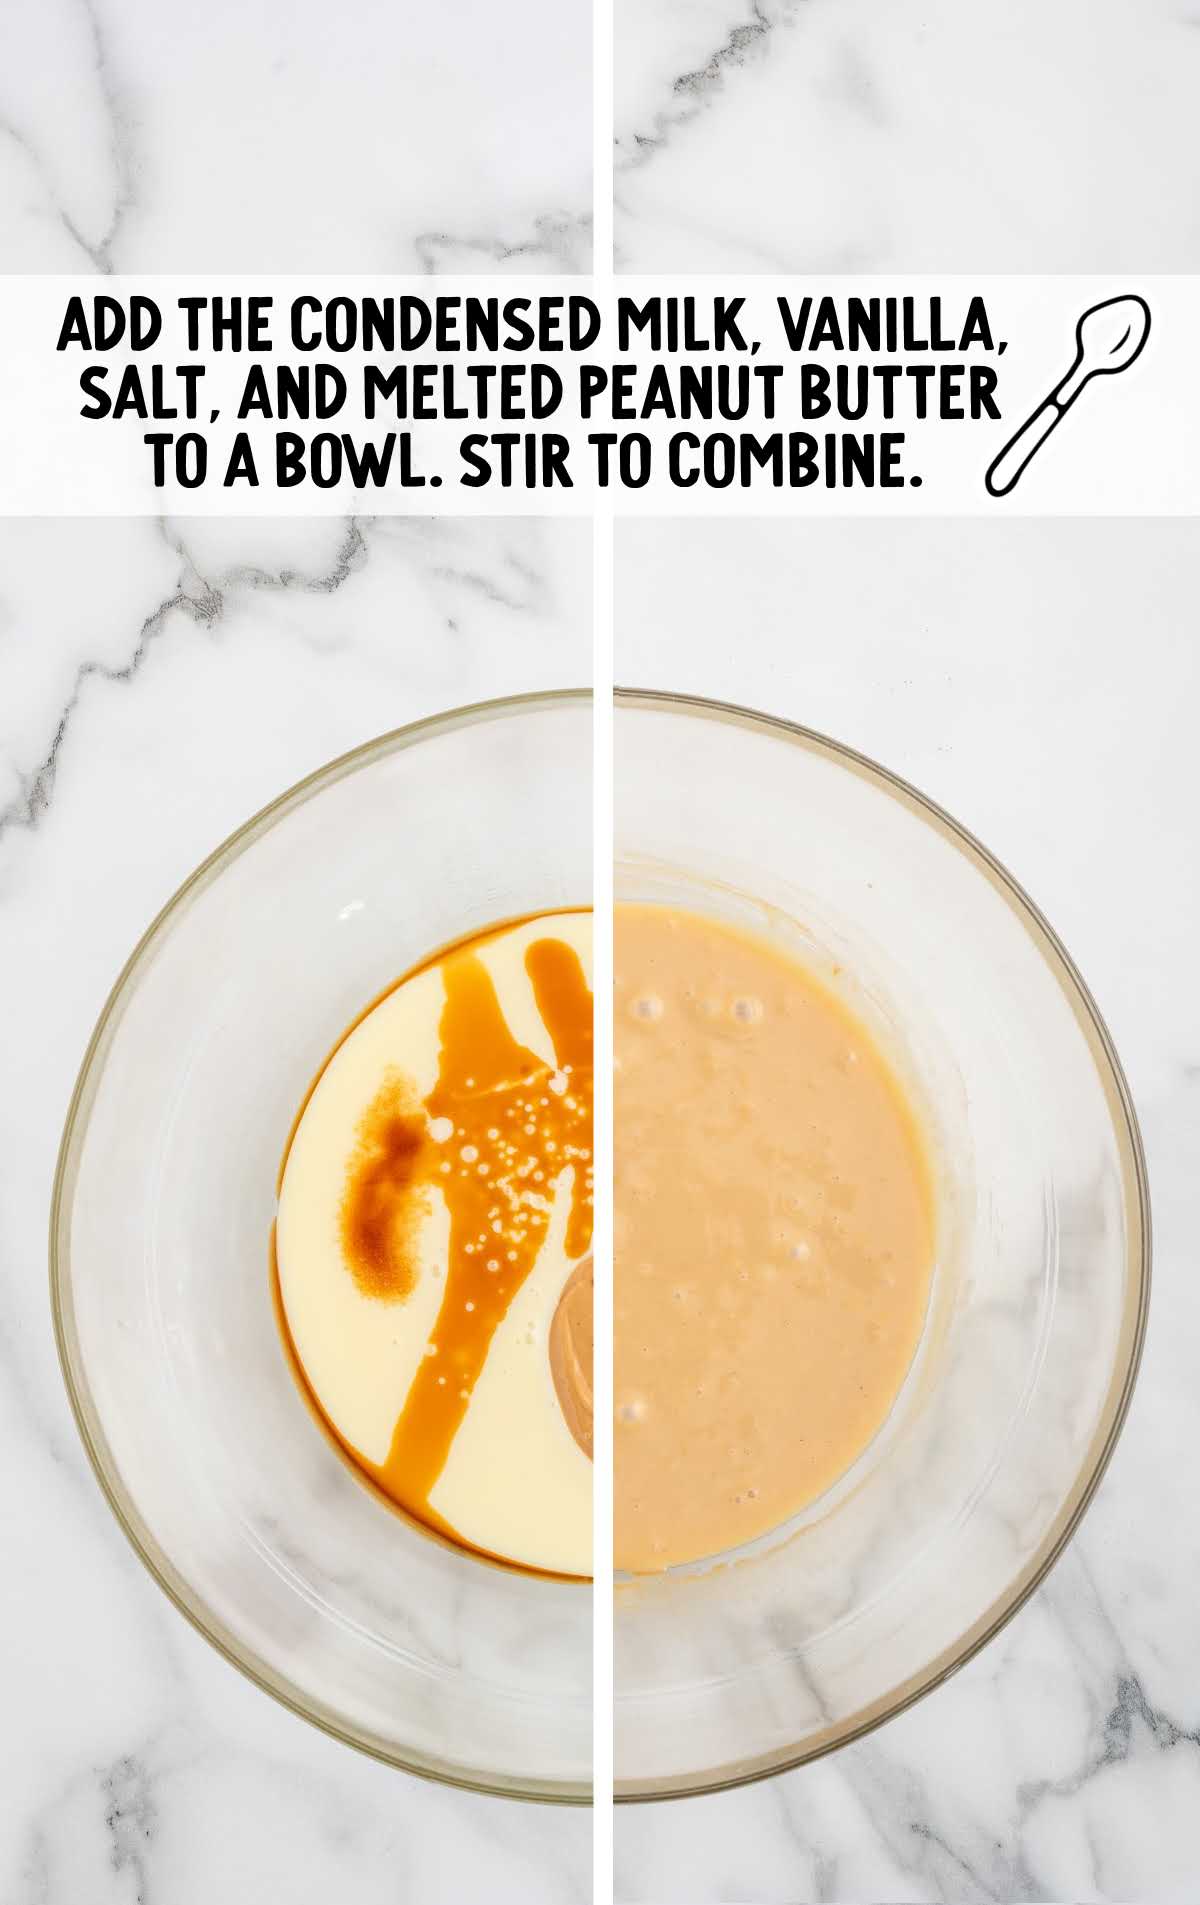 melted peanut butter with sweetened condensed milk, vanilla extract, and salt combined in a bowl